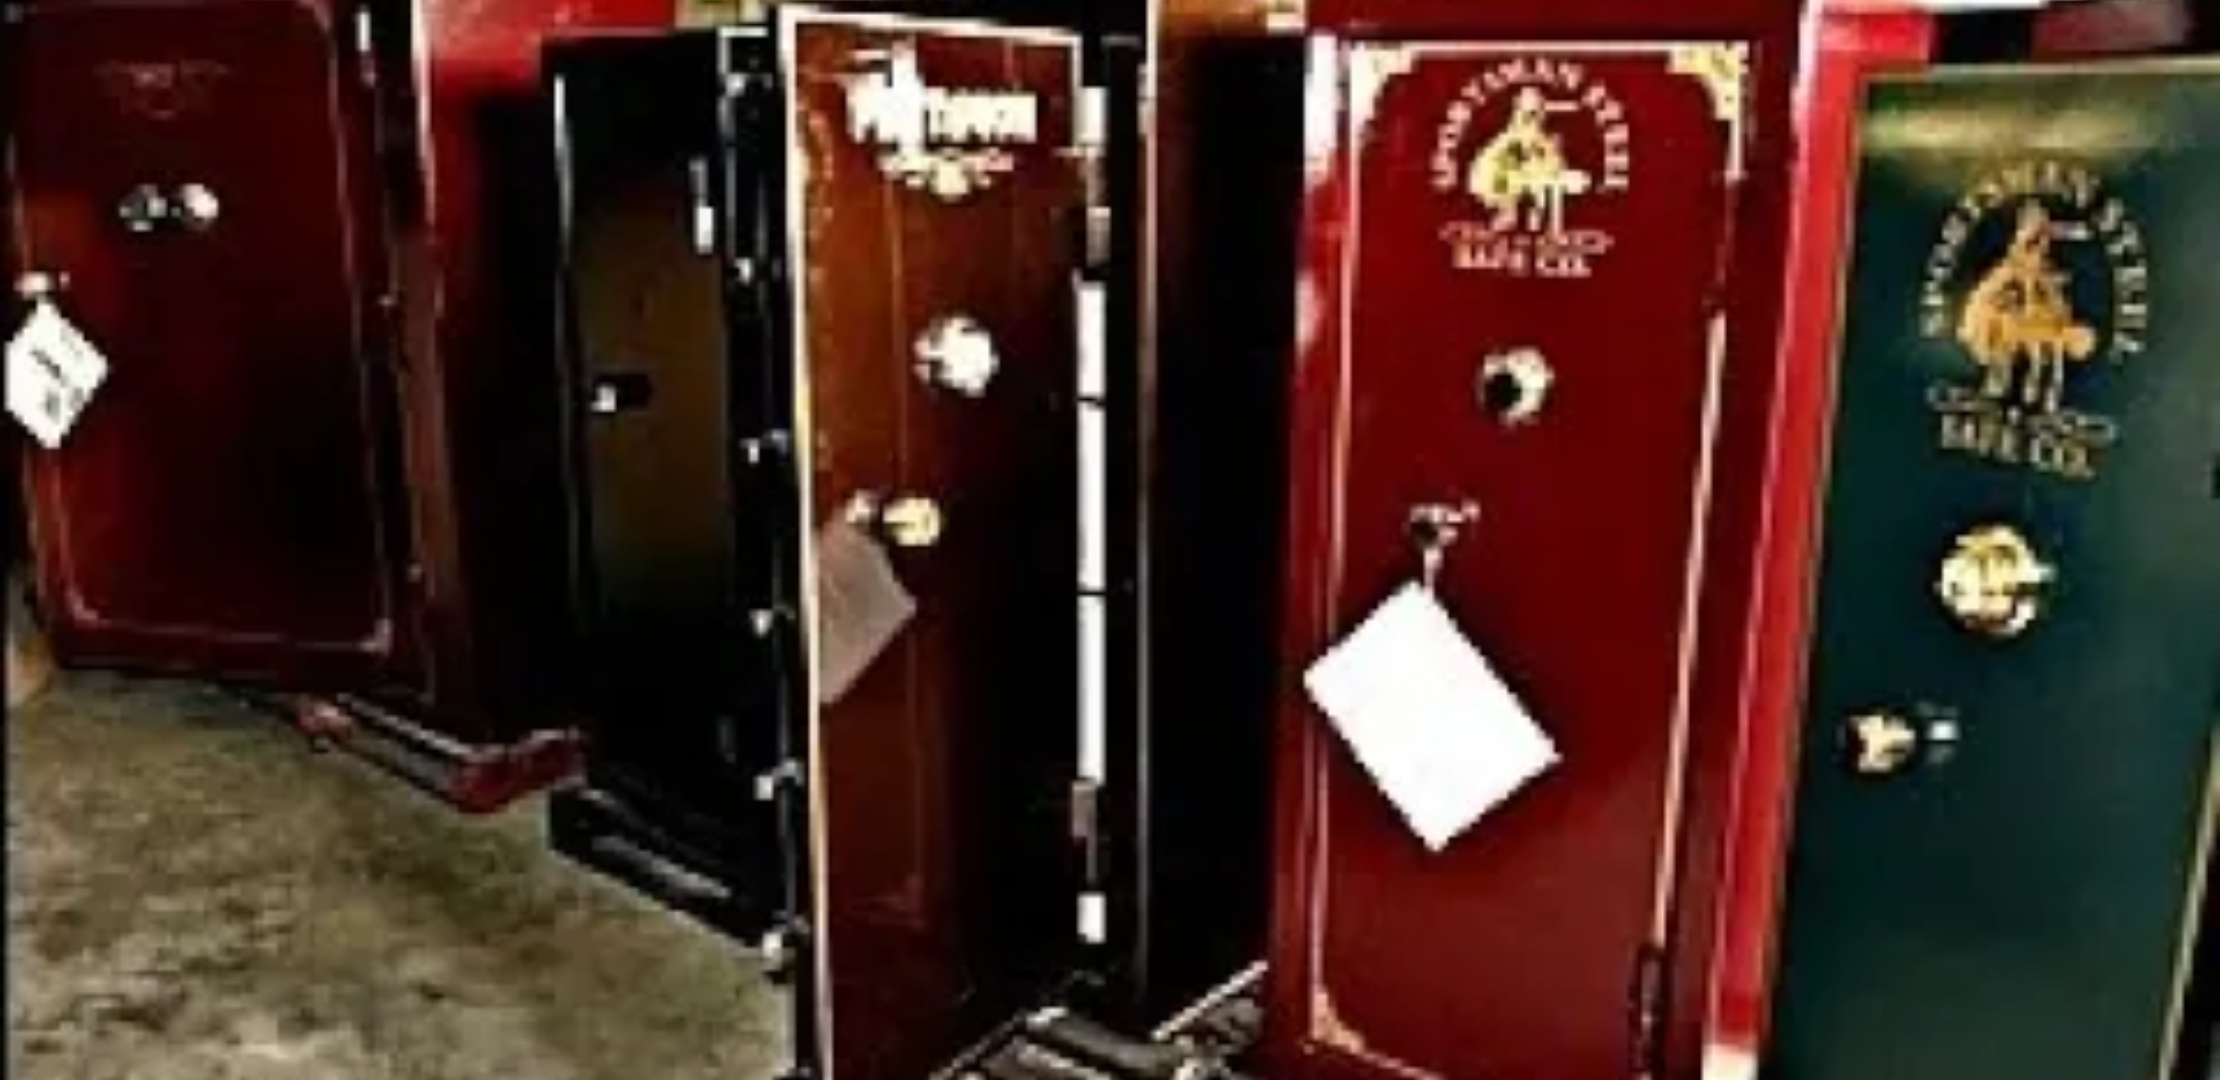 Gun Safes come in many sizes and styles